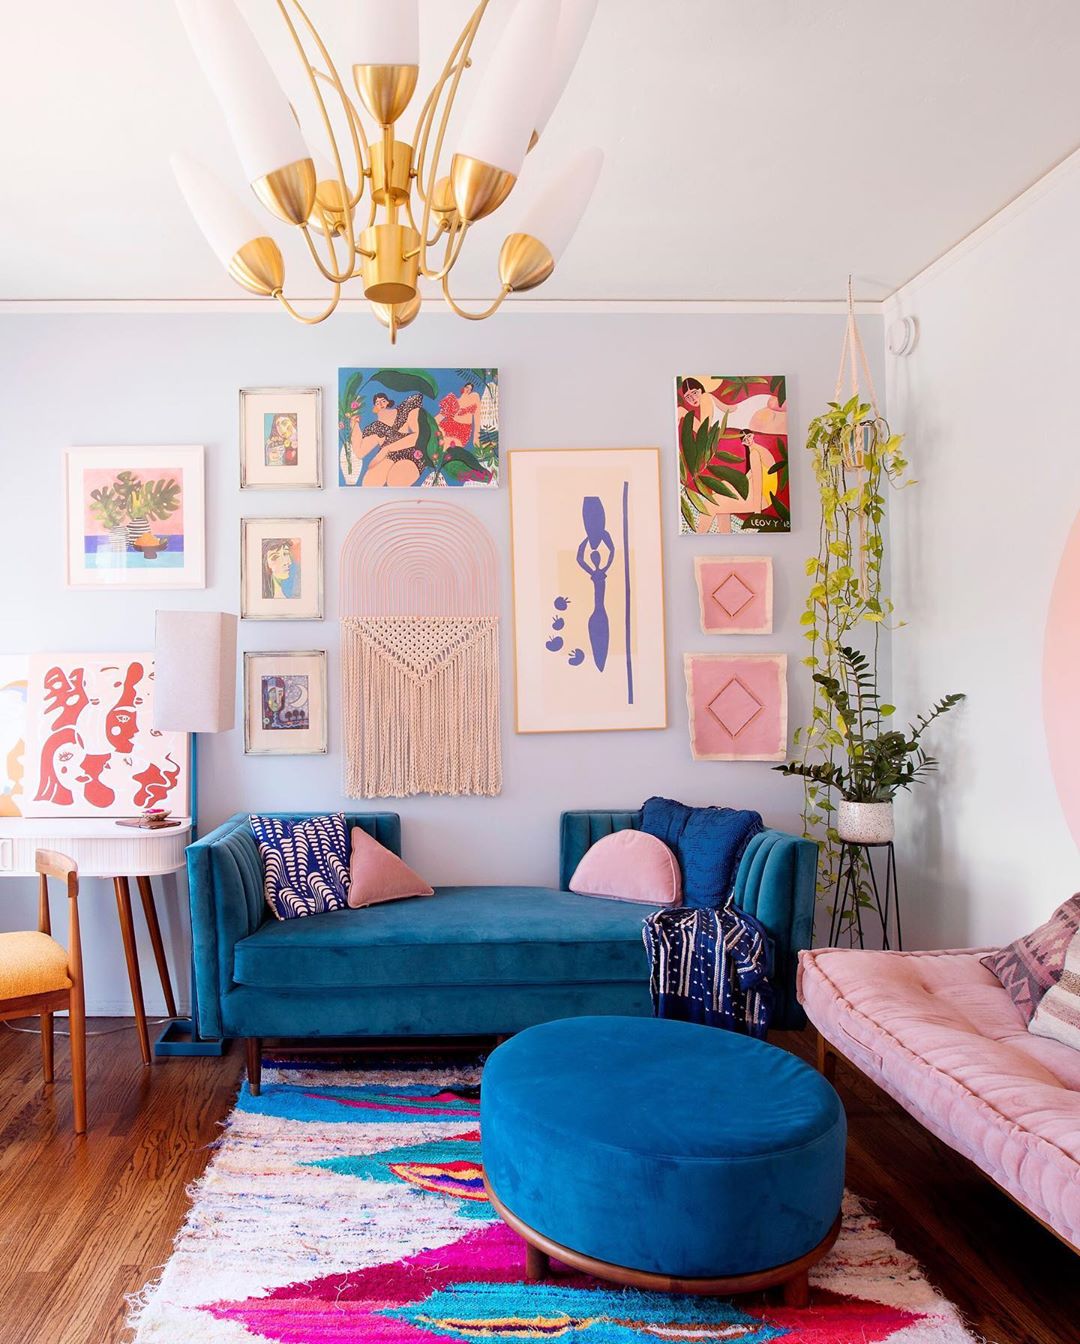 Trend Report: 5 Colors That Will Rule Interior Design in 2020